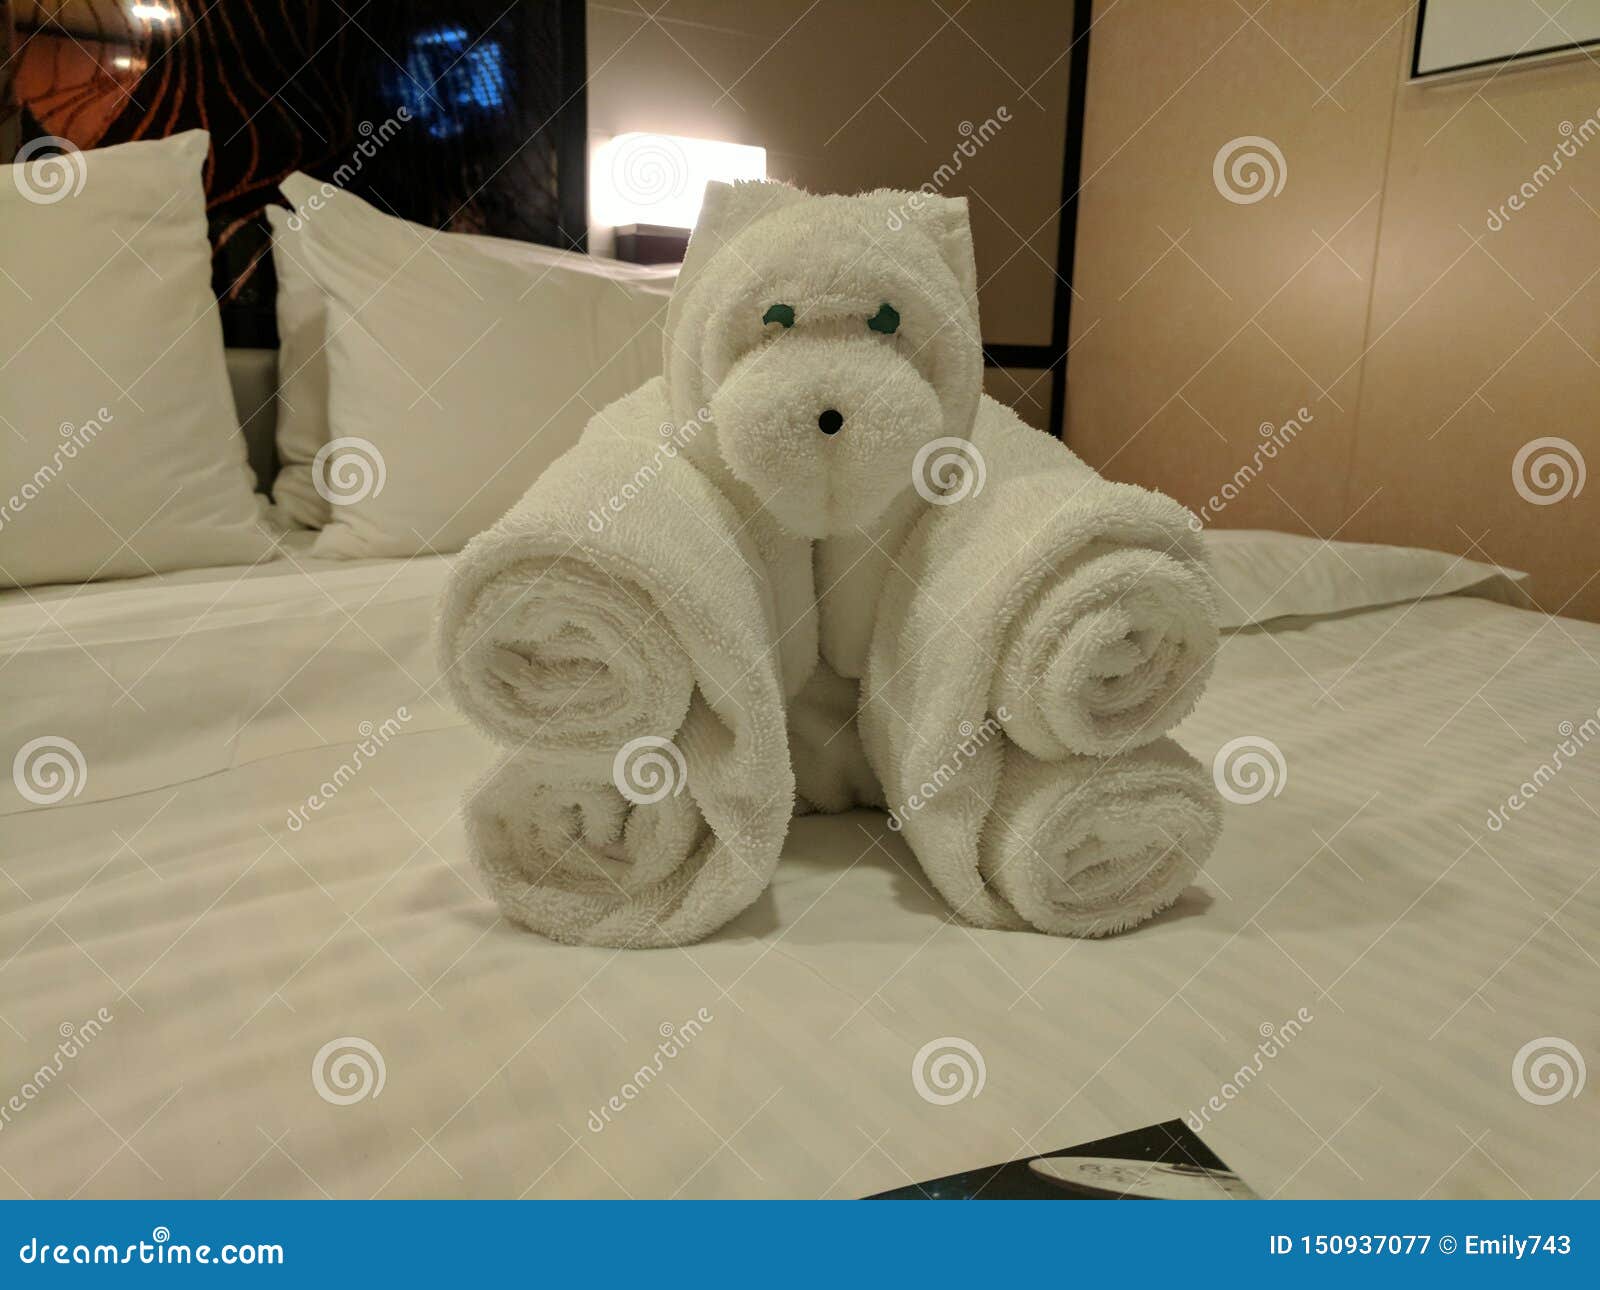 Towel Bear Origami on Cruise Ship Bed Stock Image - Image of room, teddy:  150937077